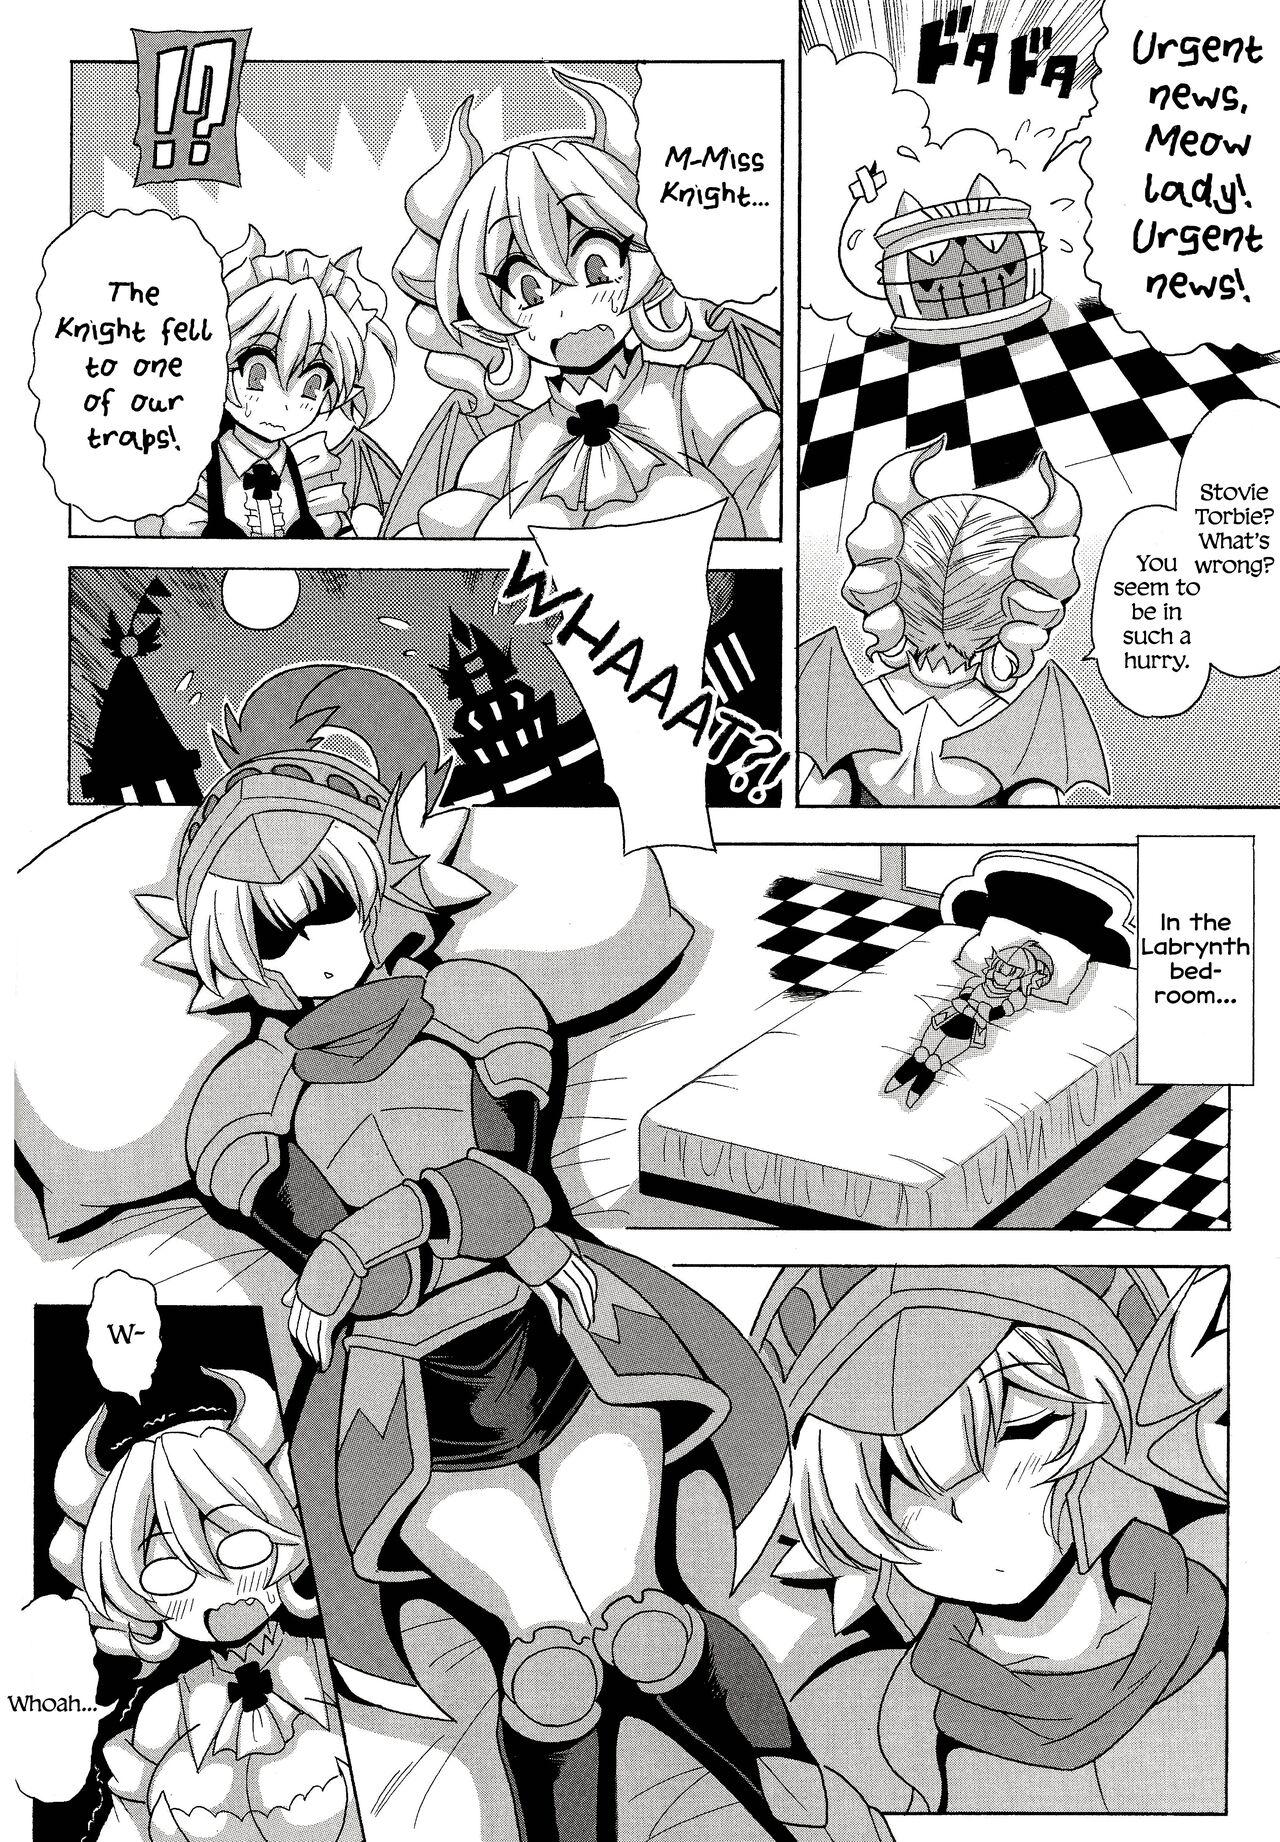 Eating LABRYNTH MILK - Yu gi oh Jerking - Page 5